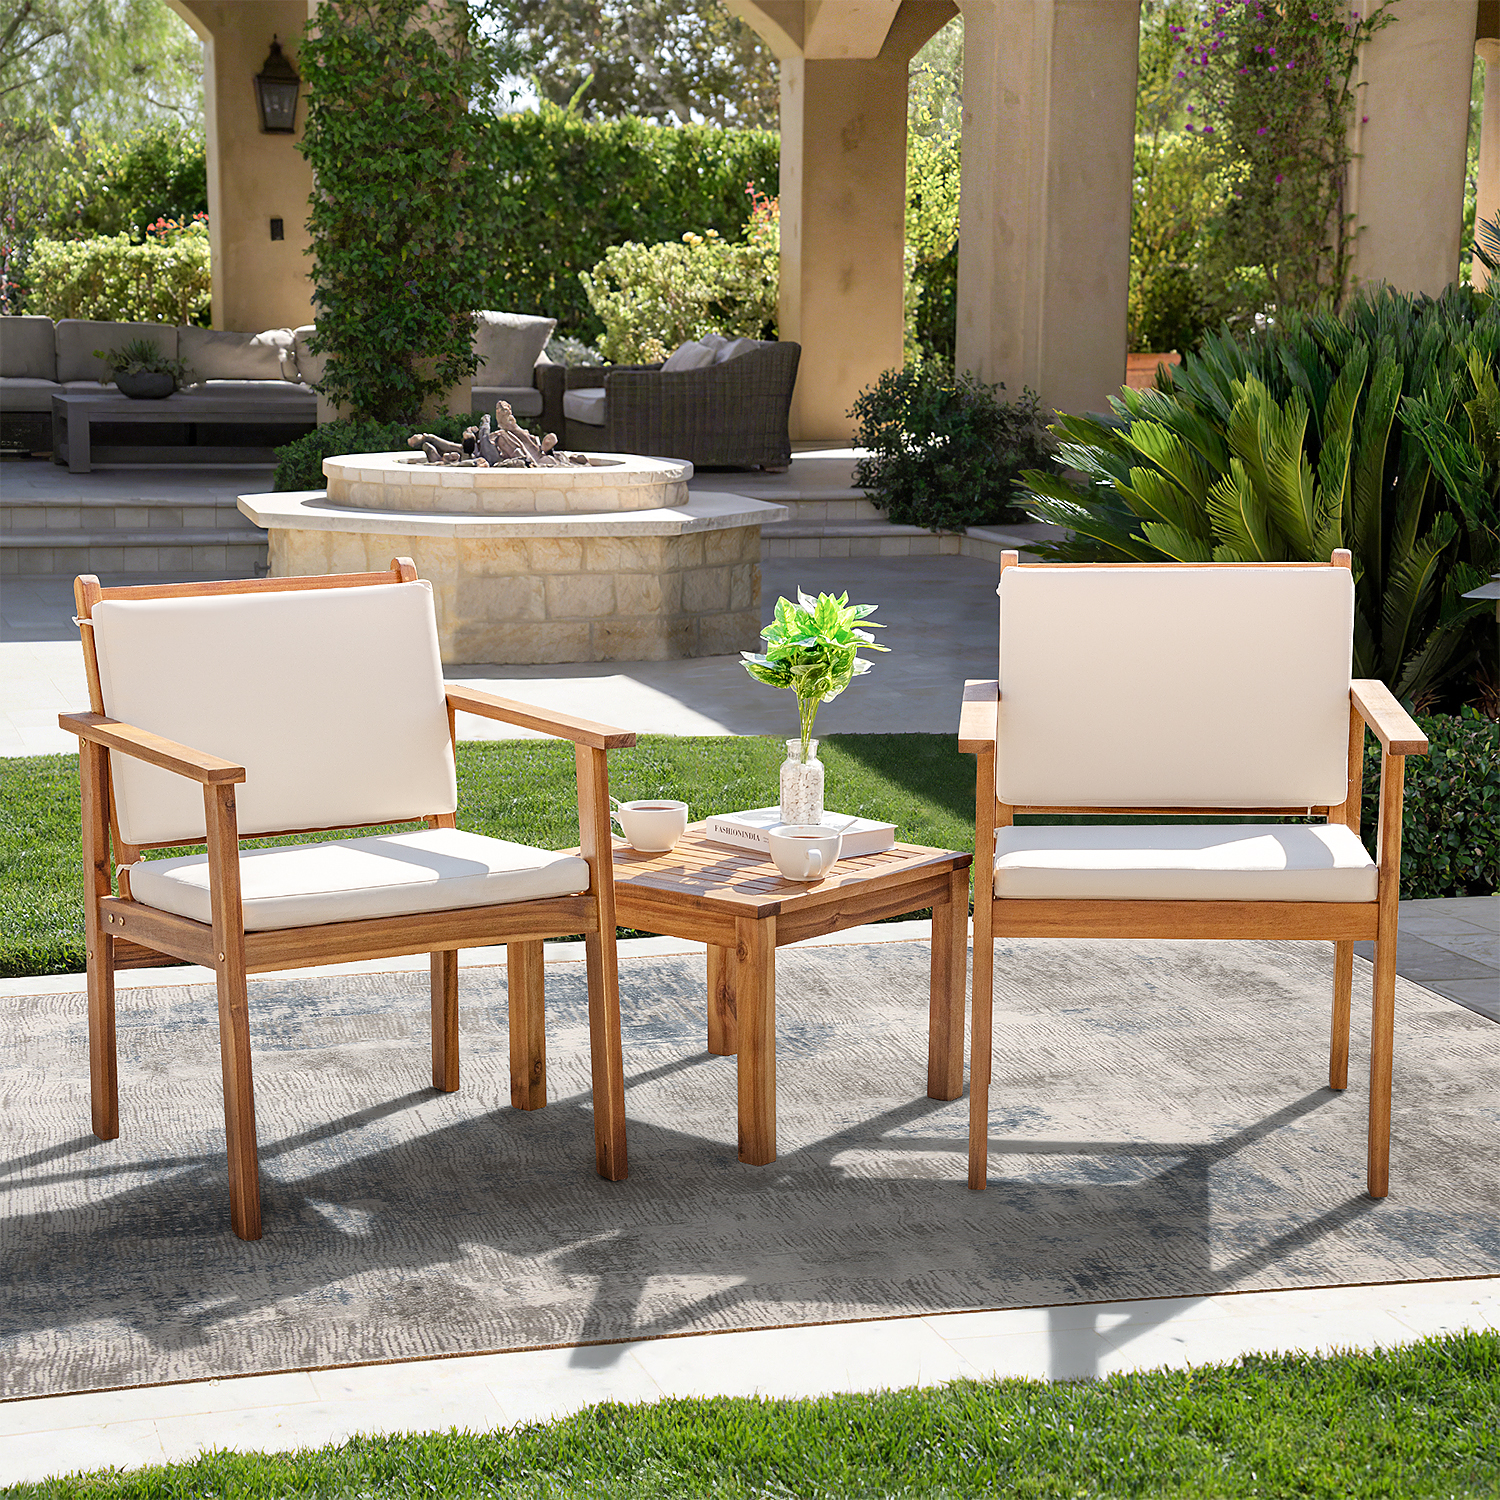 Devoko 3 Pieces Acacia Patio Conversation Set Outdoor Furniture Set with Cushions and Side Table for Porch, Yard and Balcony, Beige - image 1 of 7